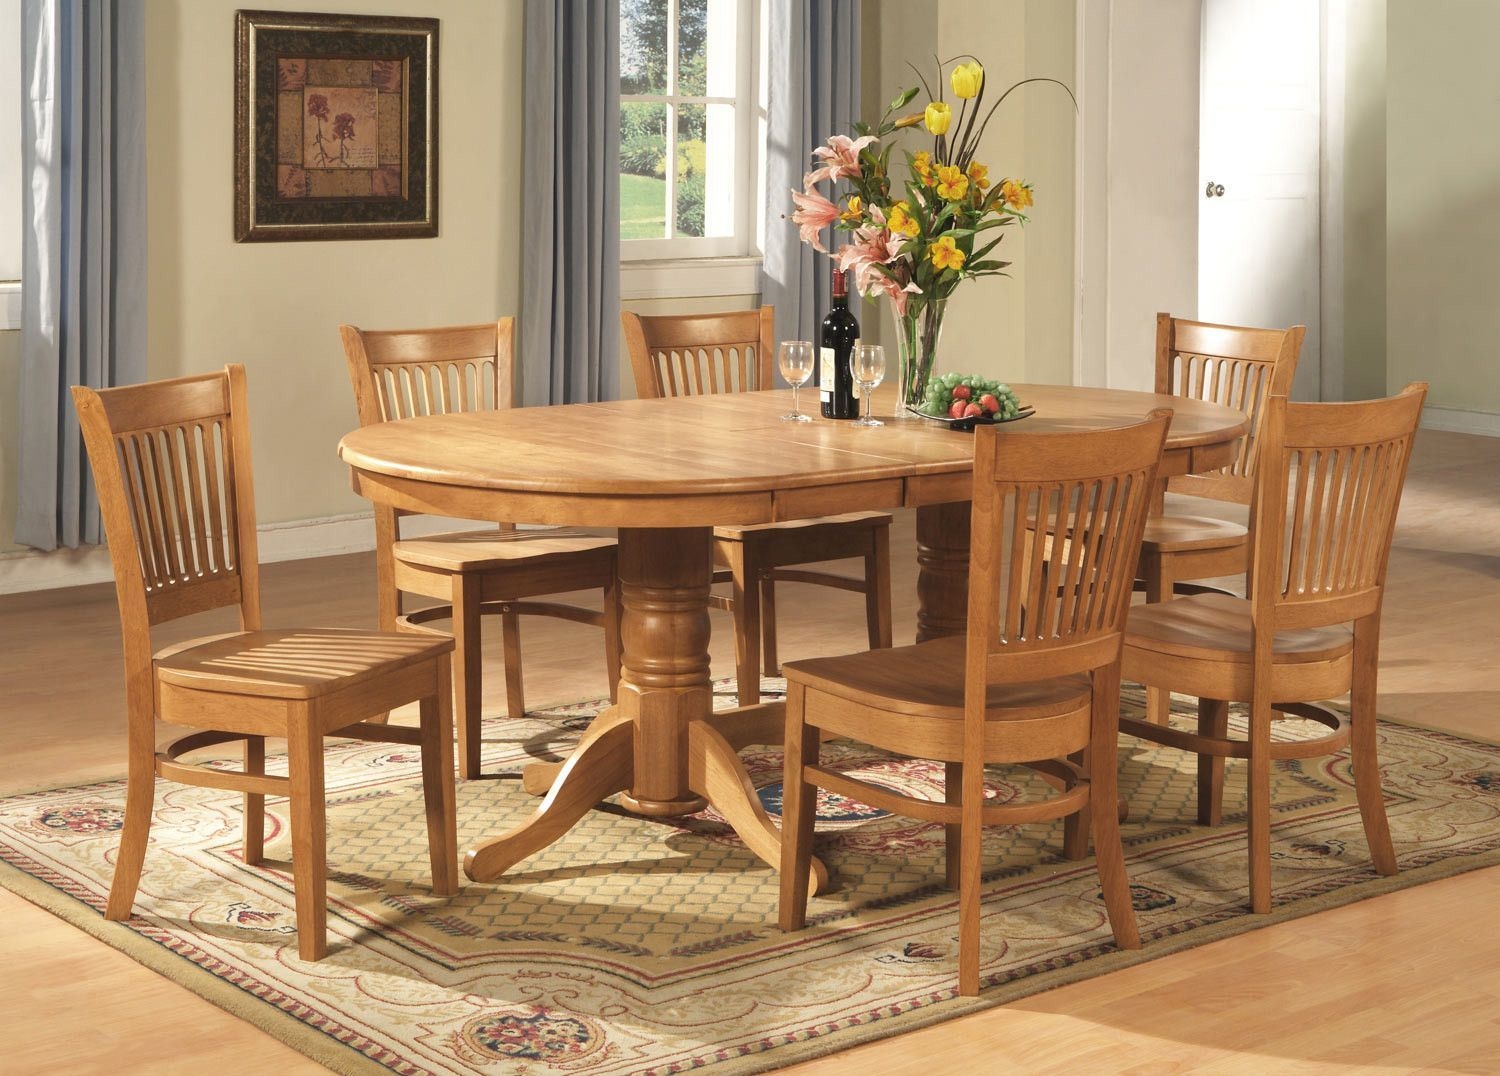 Dinette4less store for many more dining dinette kitchen table chairs